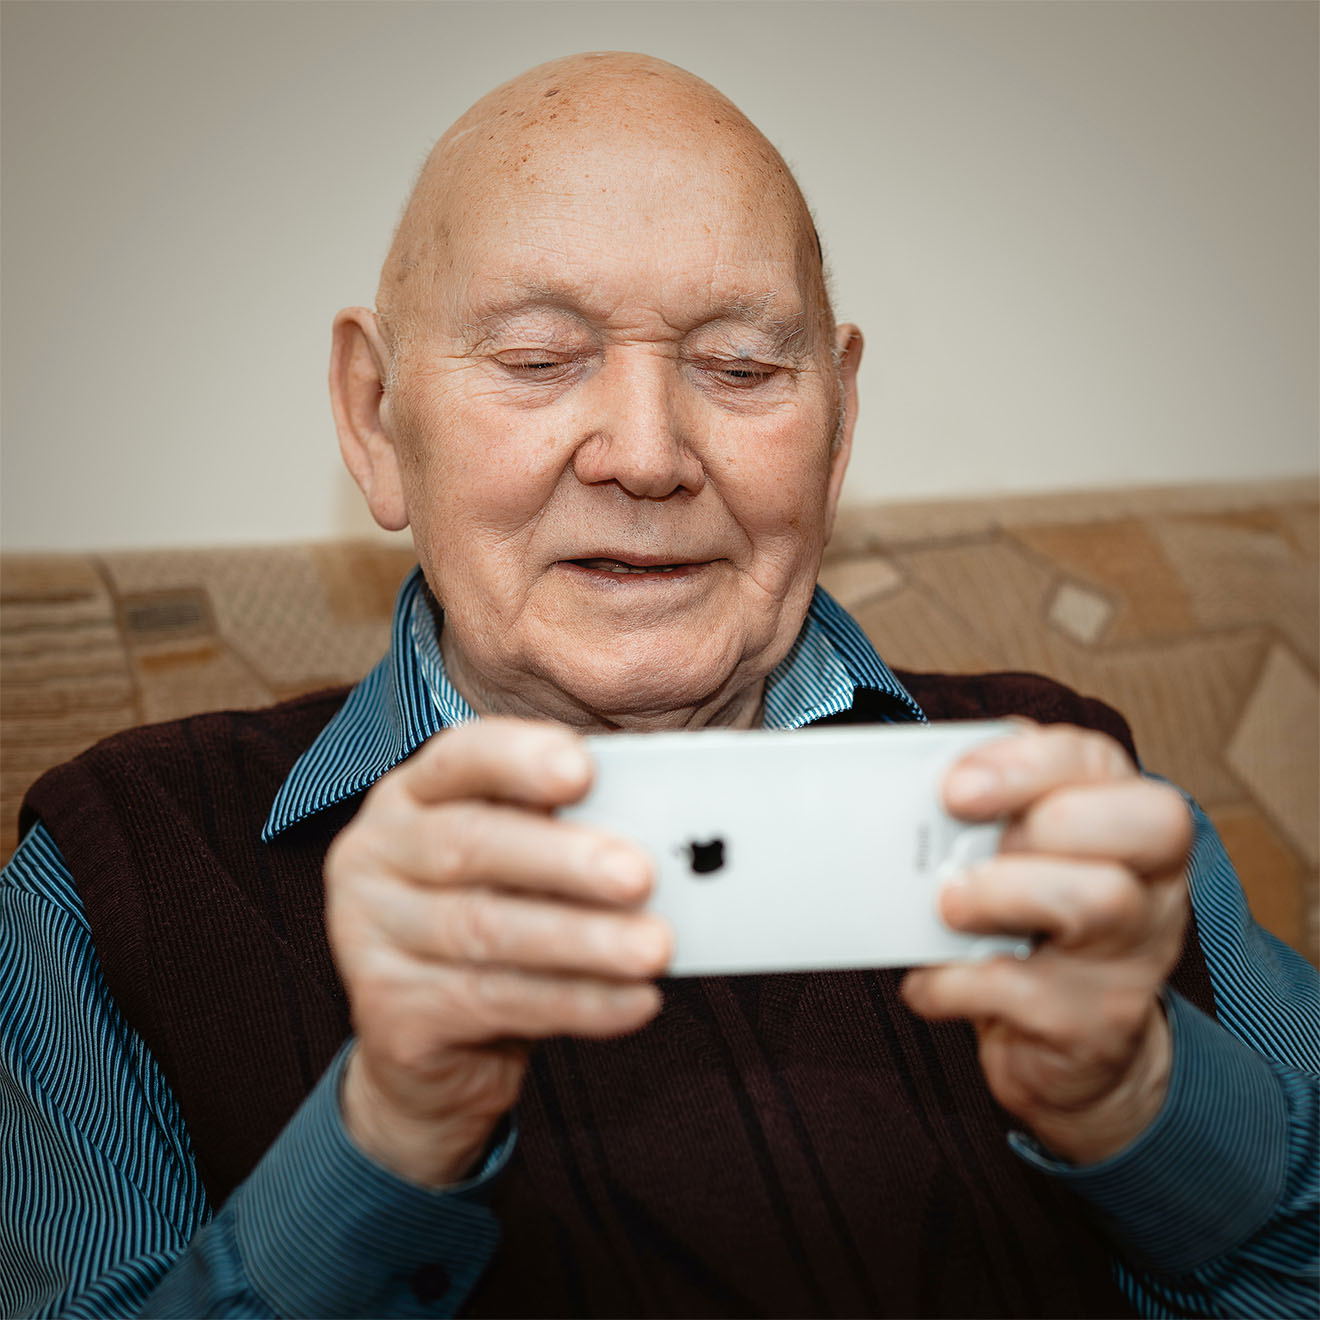 resident playing on a phone